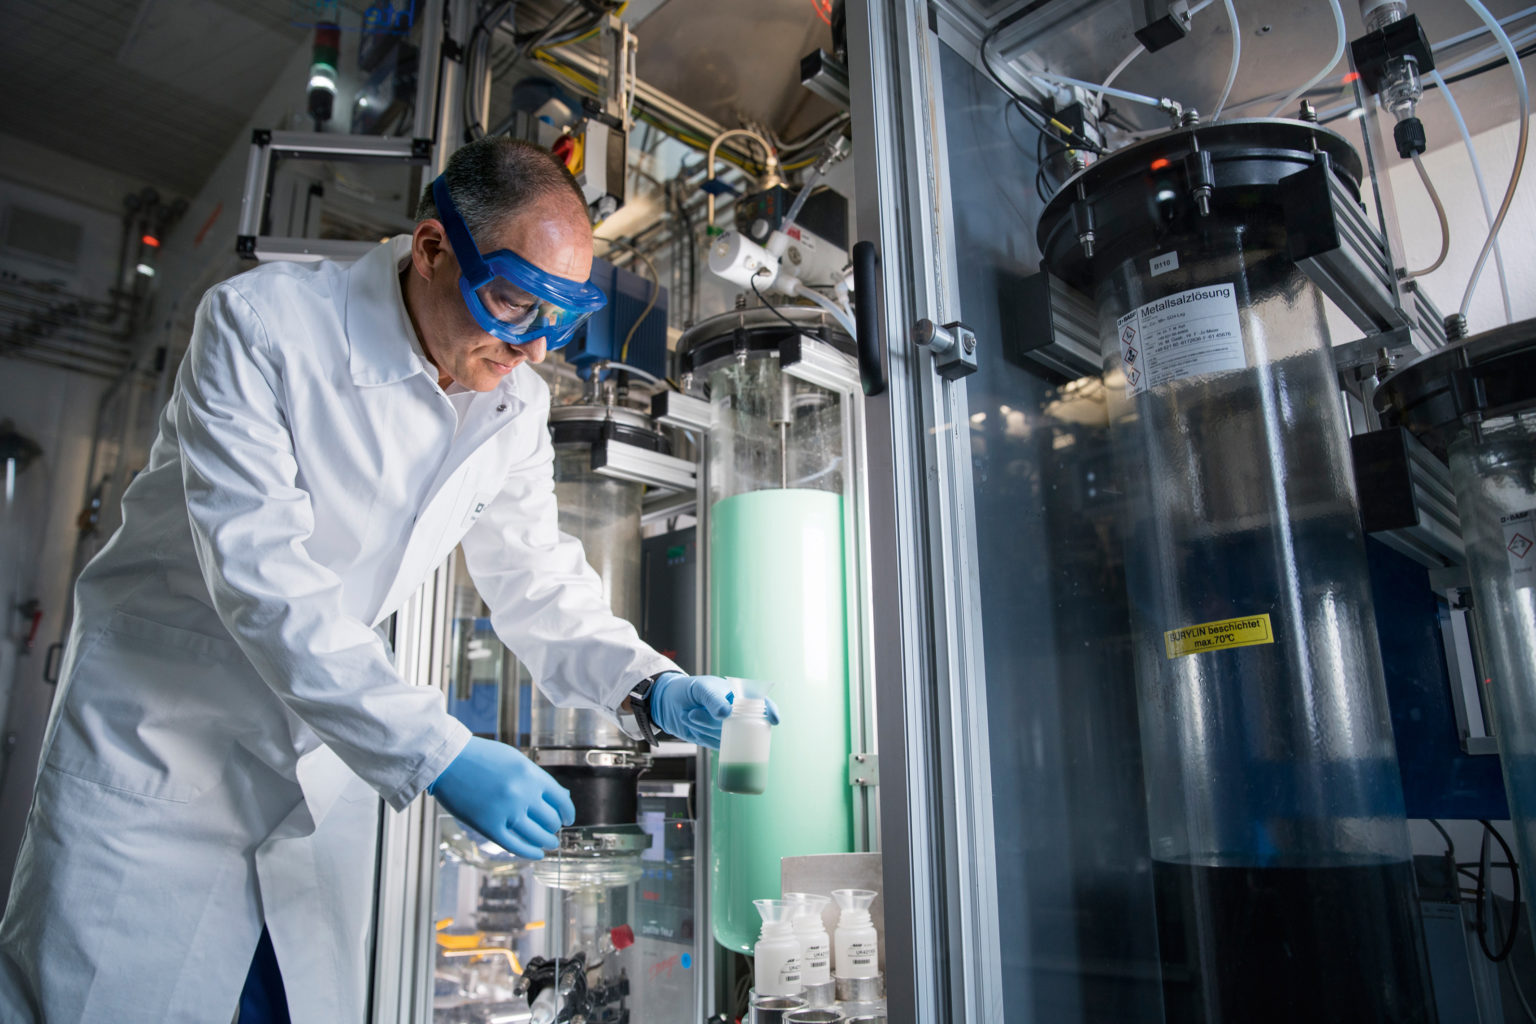 Man in lab coat and goggles holding a glass of green liquid in a BASF chemicals facility